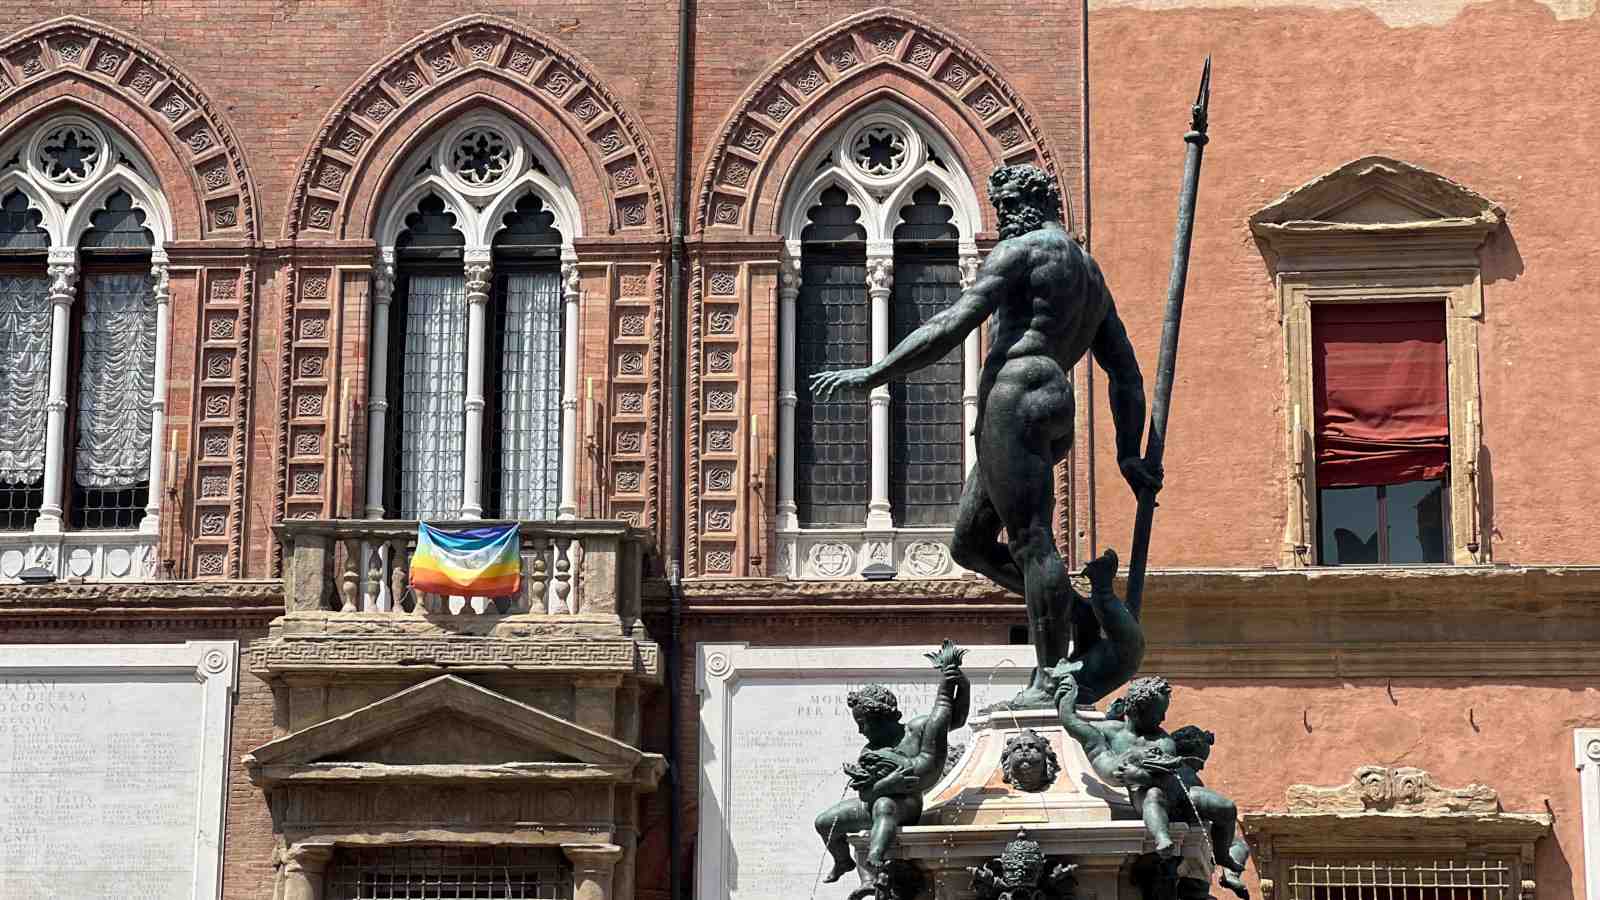 Neptuno statue in gay Bologna with rainbow flag behind it.